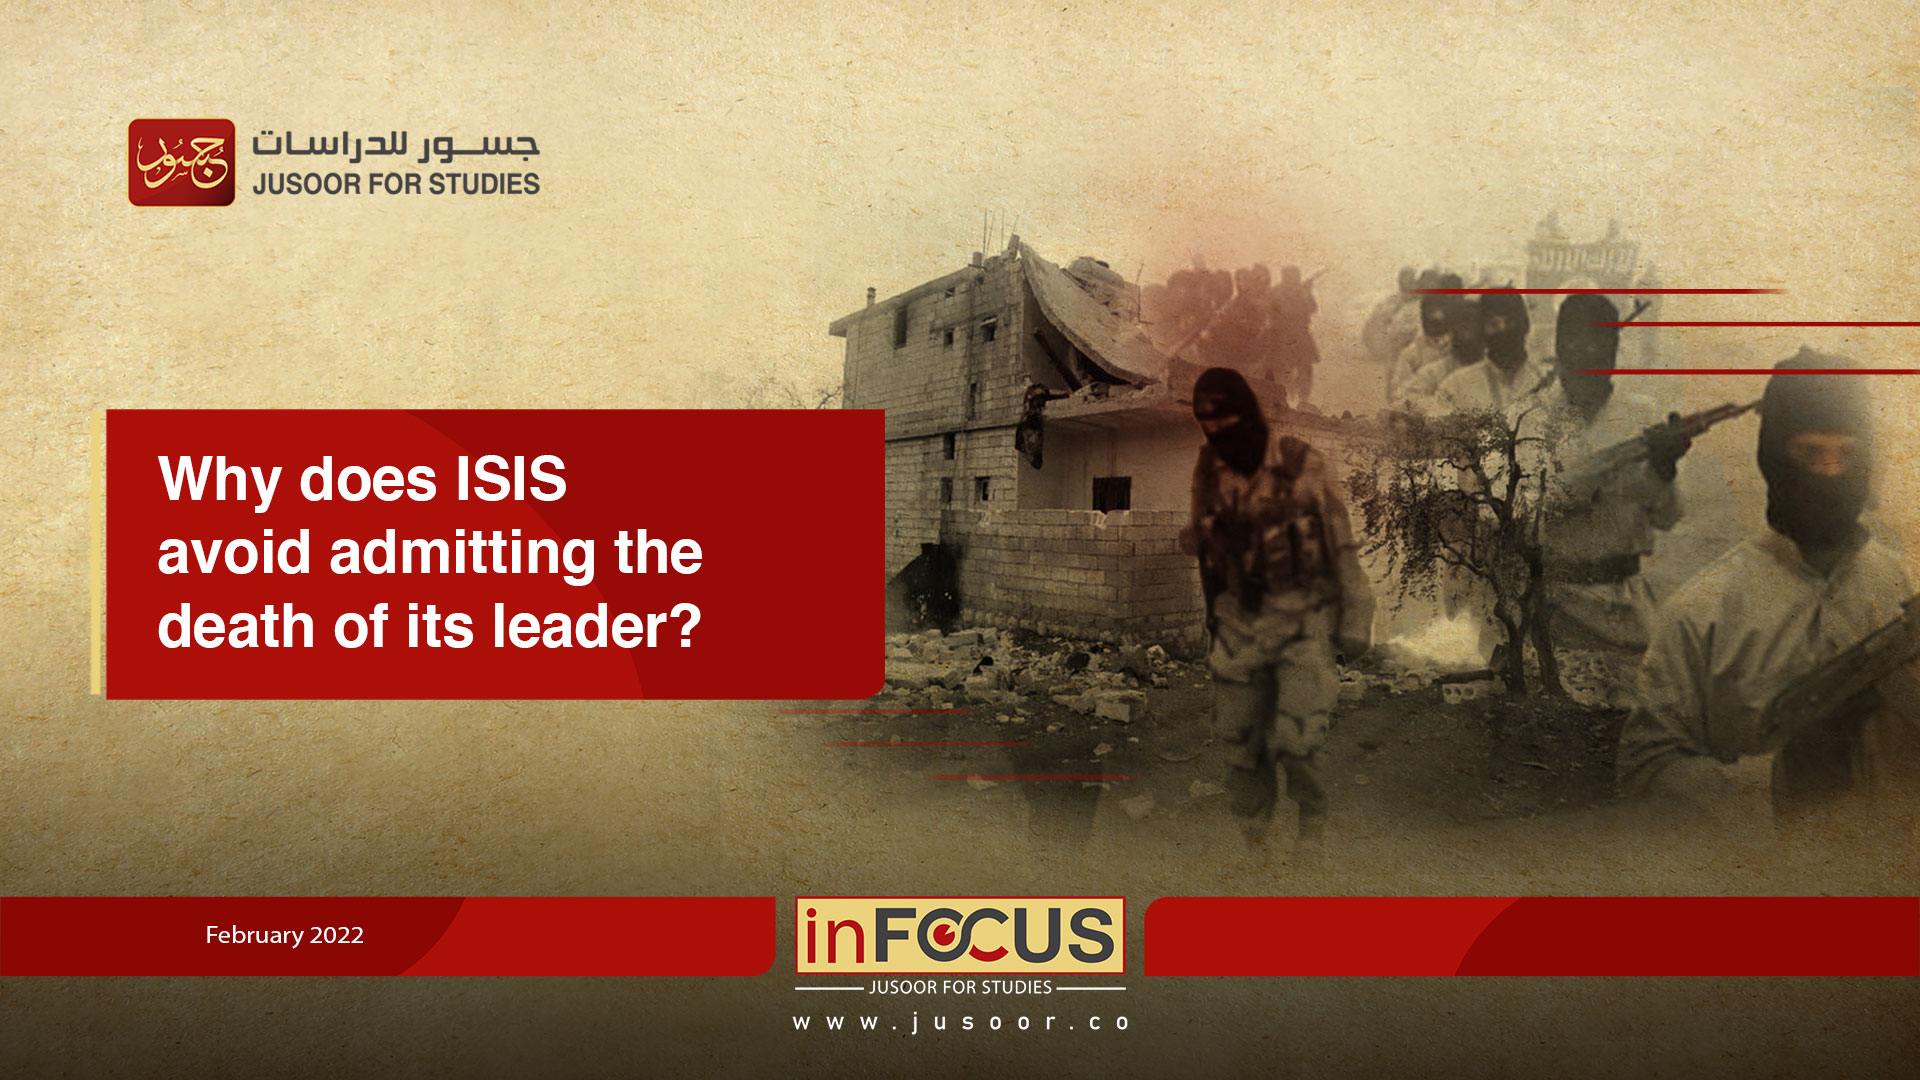 Why does ISIS avoid admitting the death of its leader?